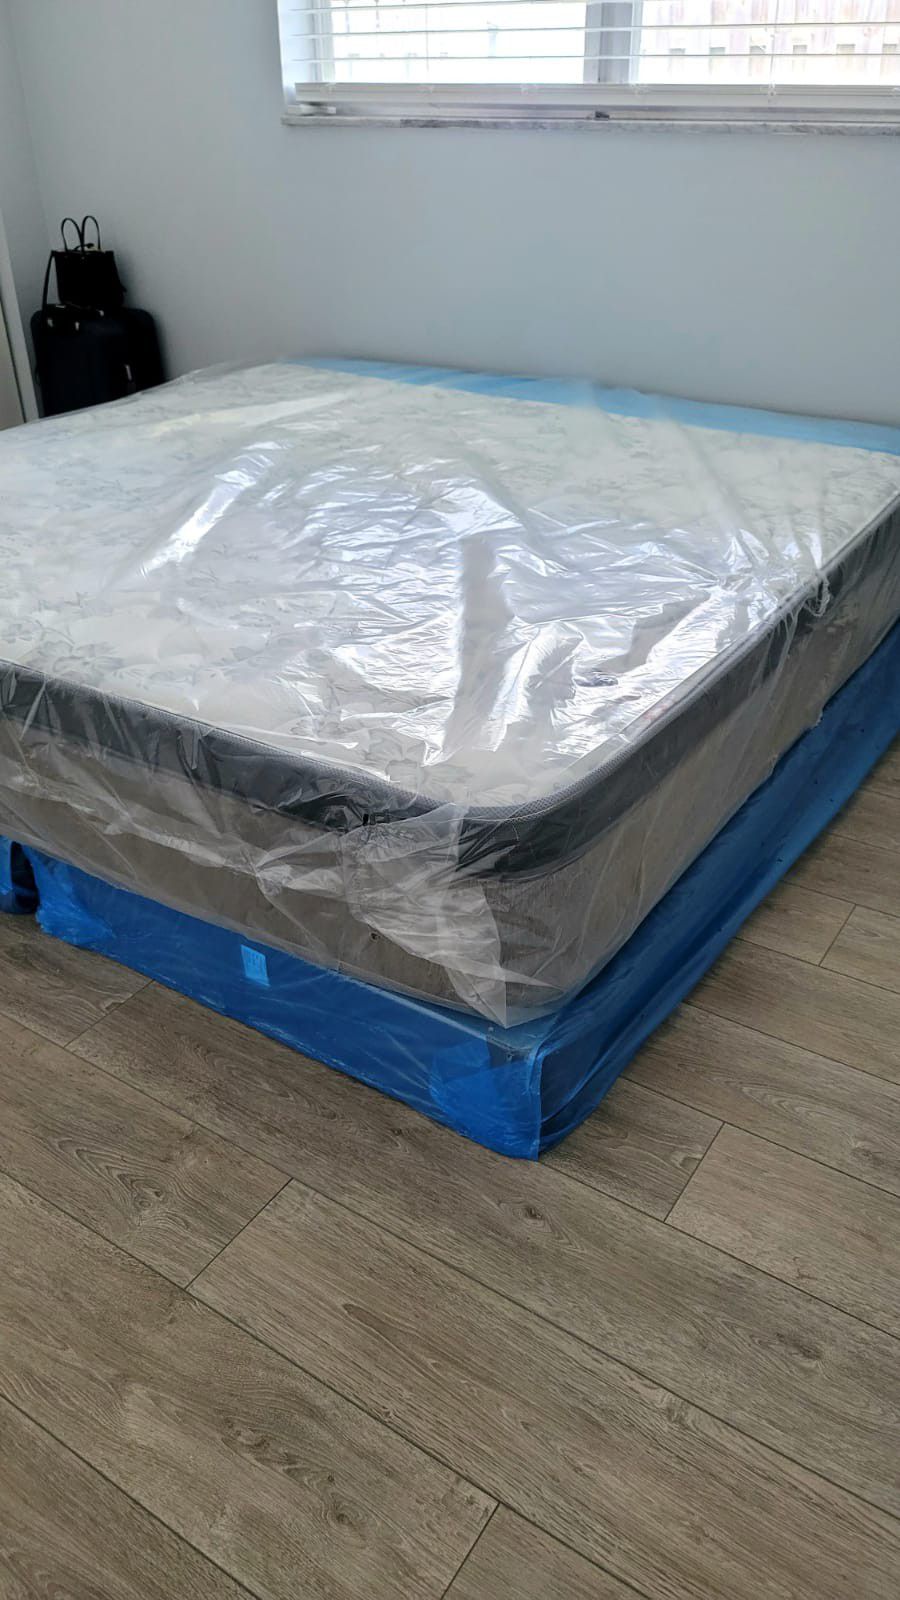 NEW KING PLUSH PILLOW TOP MATTRESS. Bed frame is not available. Take it home same day 👍